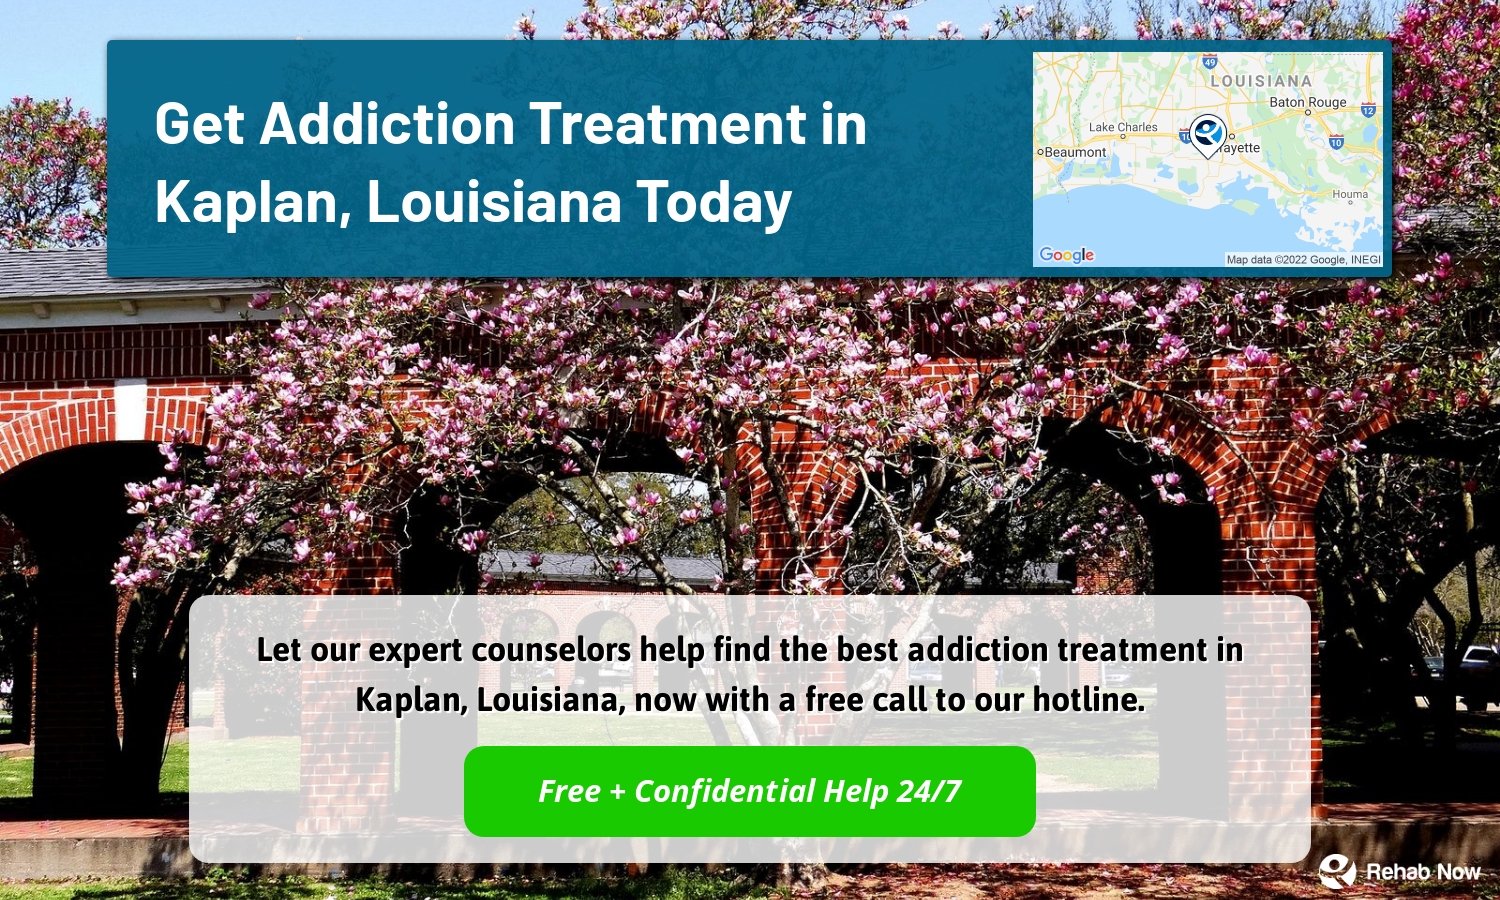 Let our expert counselors help find the best addiction treatment in Kaplan, Louisiana, now with a free call to our hotline.